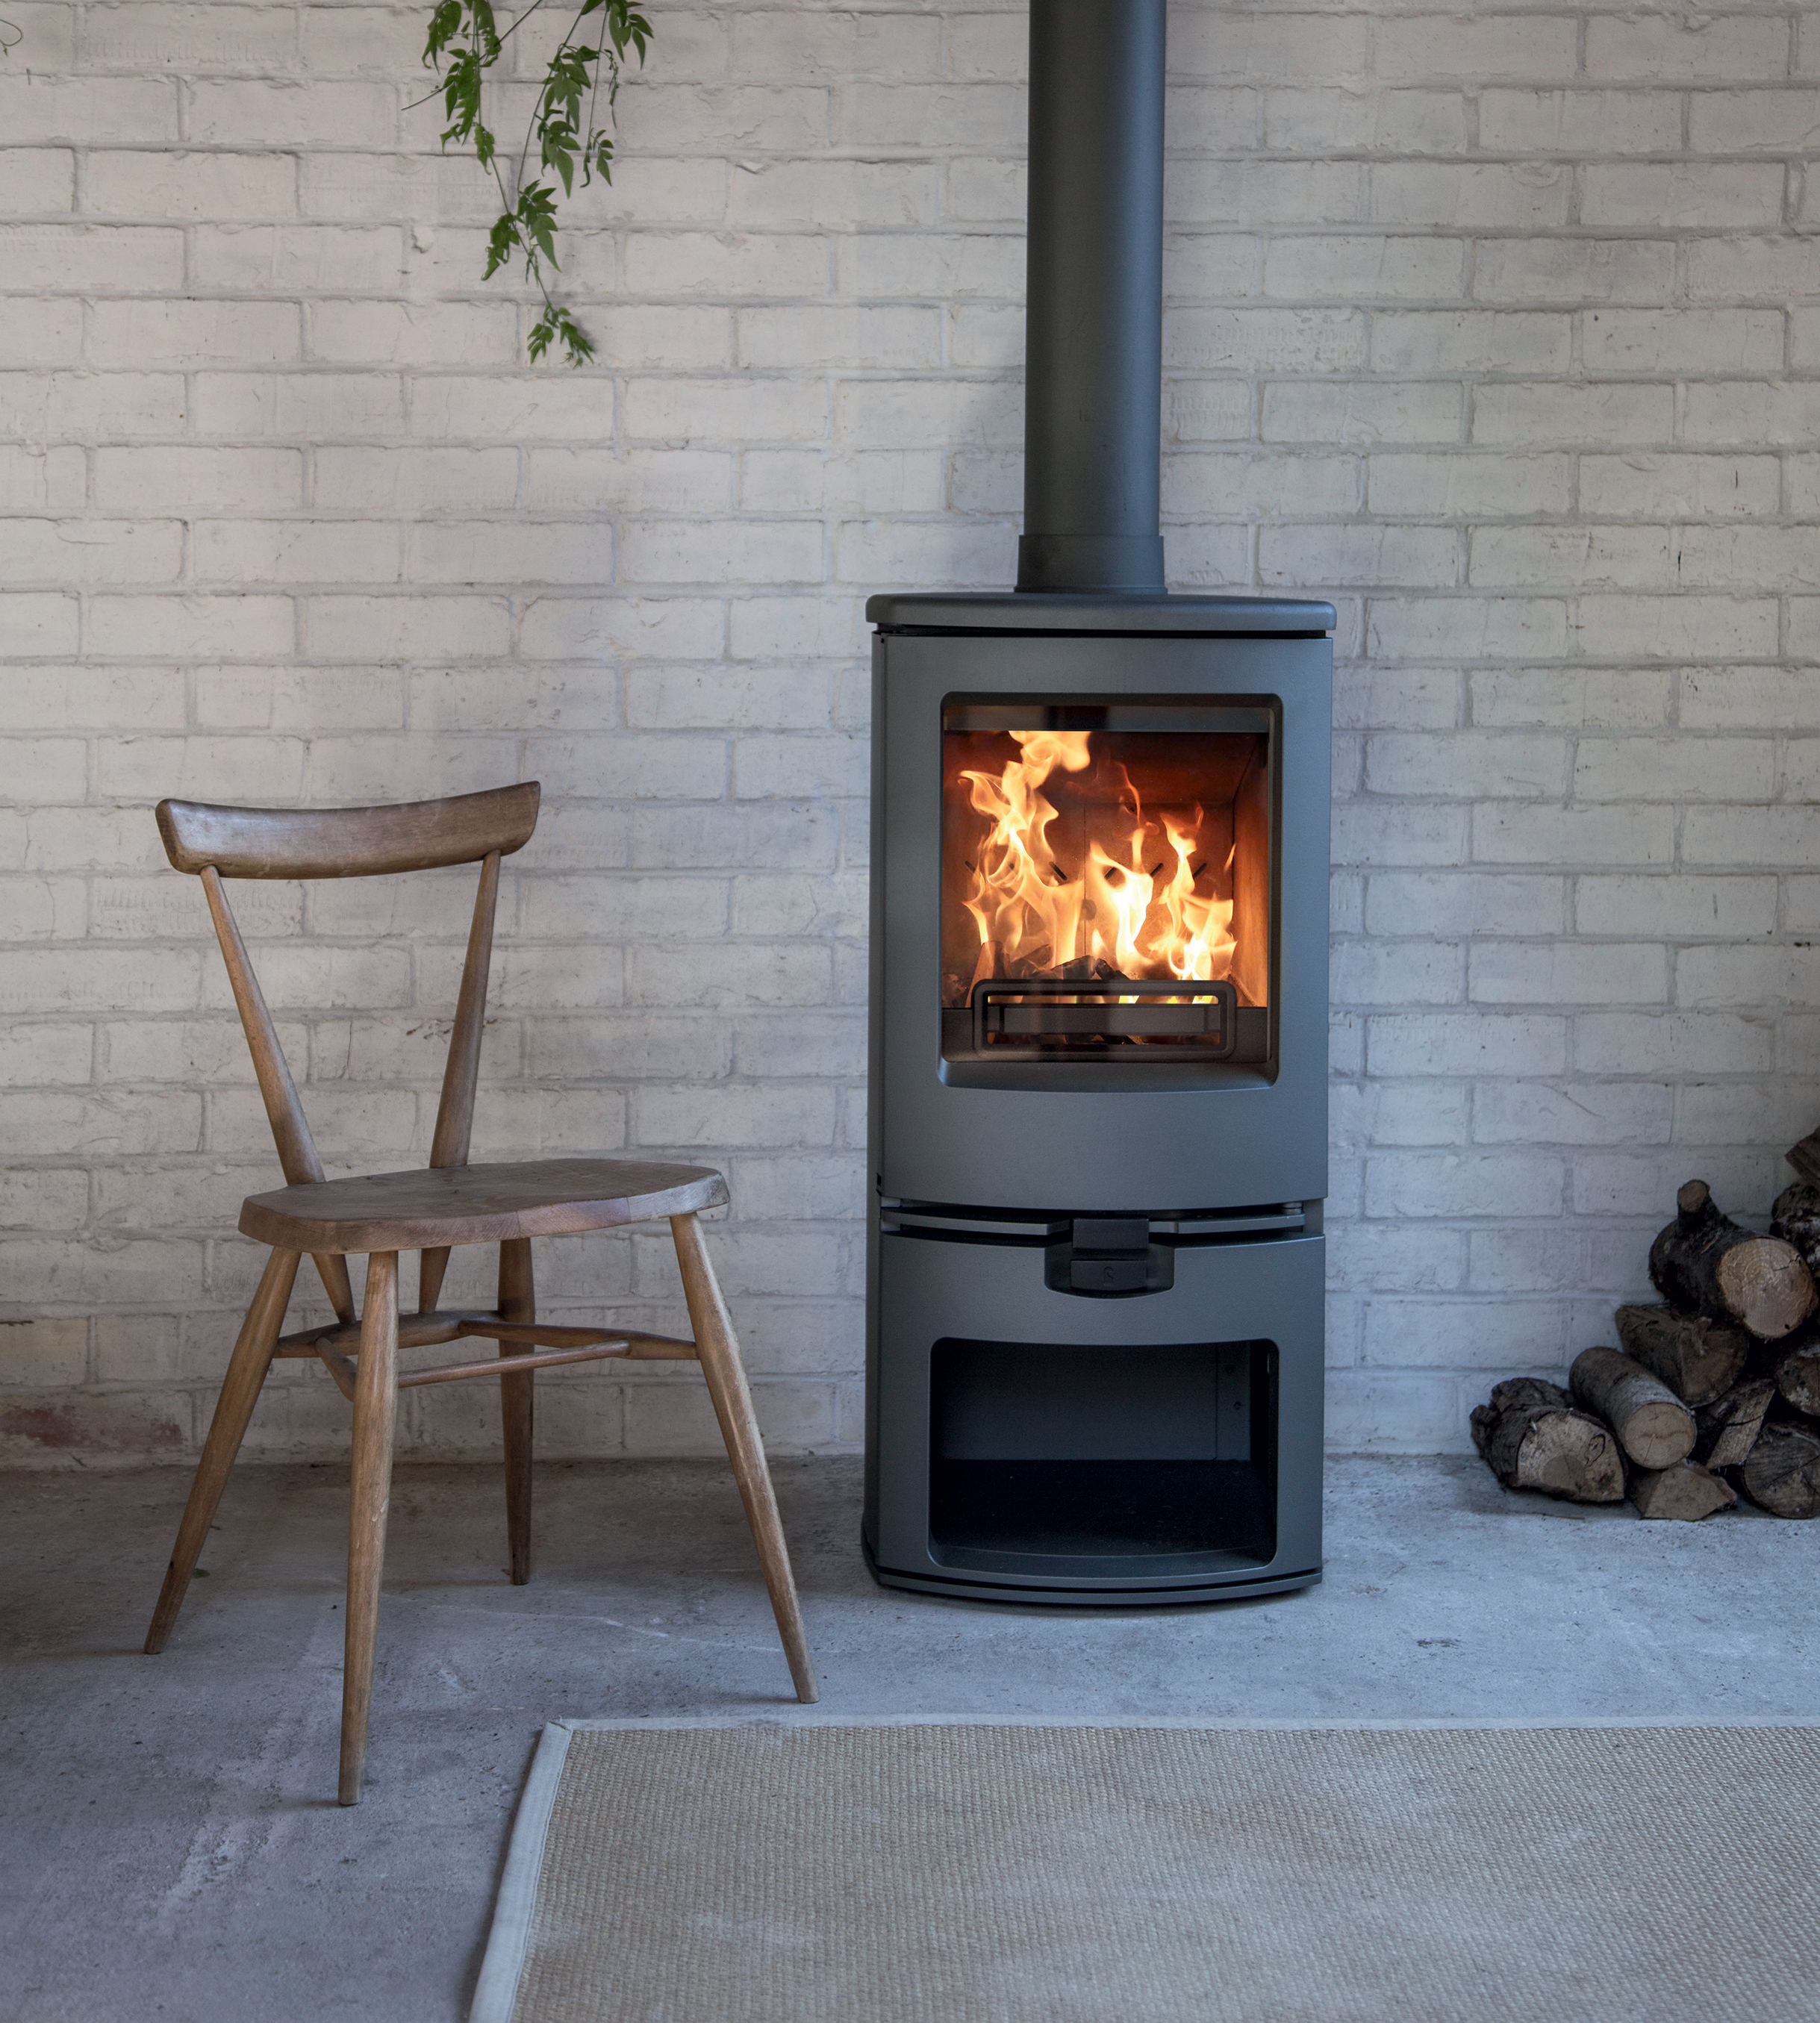 How Much Will My Woodburning Stove Cost, Average Cost To Add A Wood Burning Fireplace